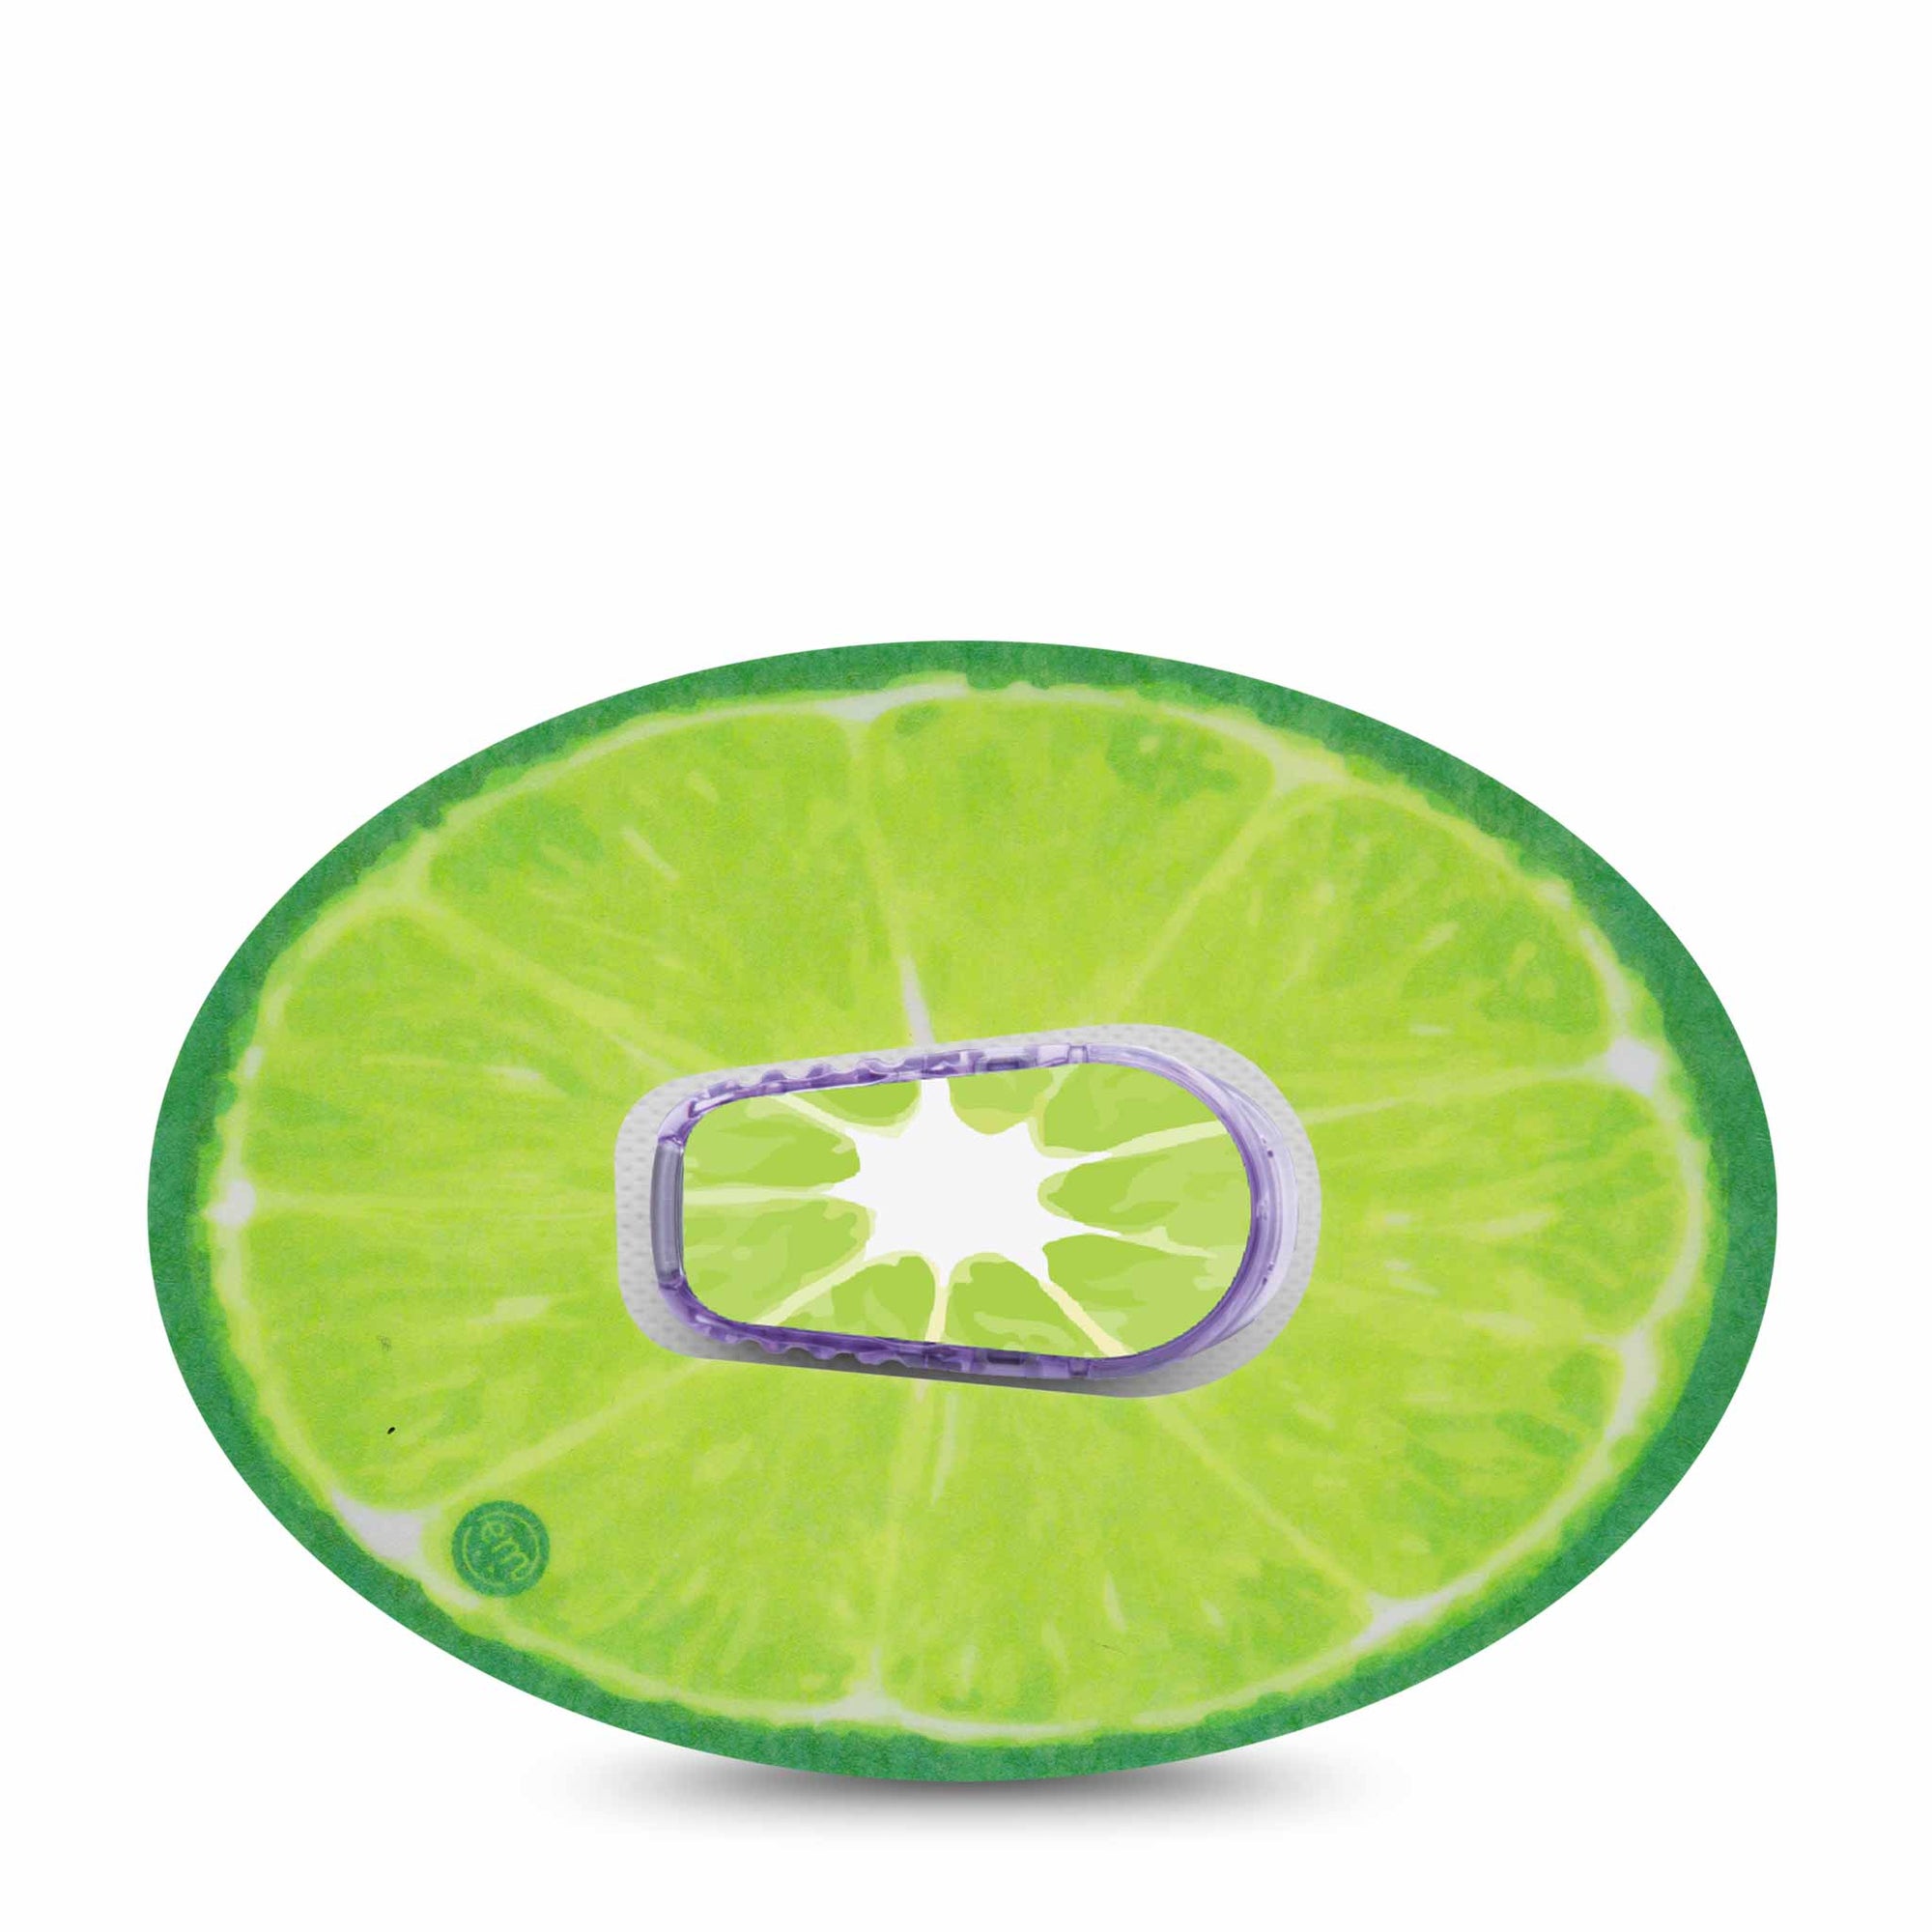 ExpressionMed Lime Dexcom G6 Transmitter Sticker with Tape